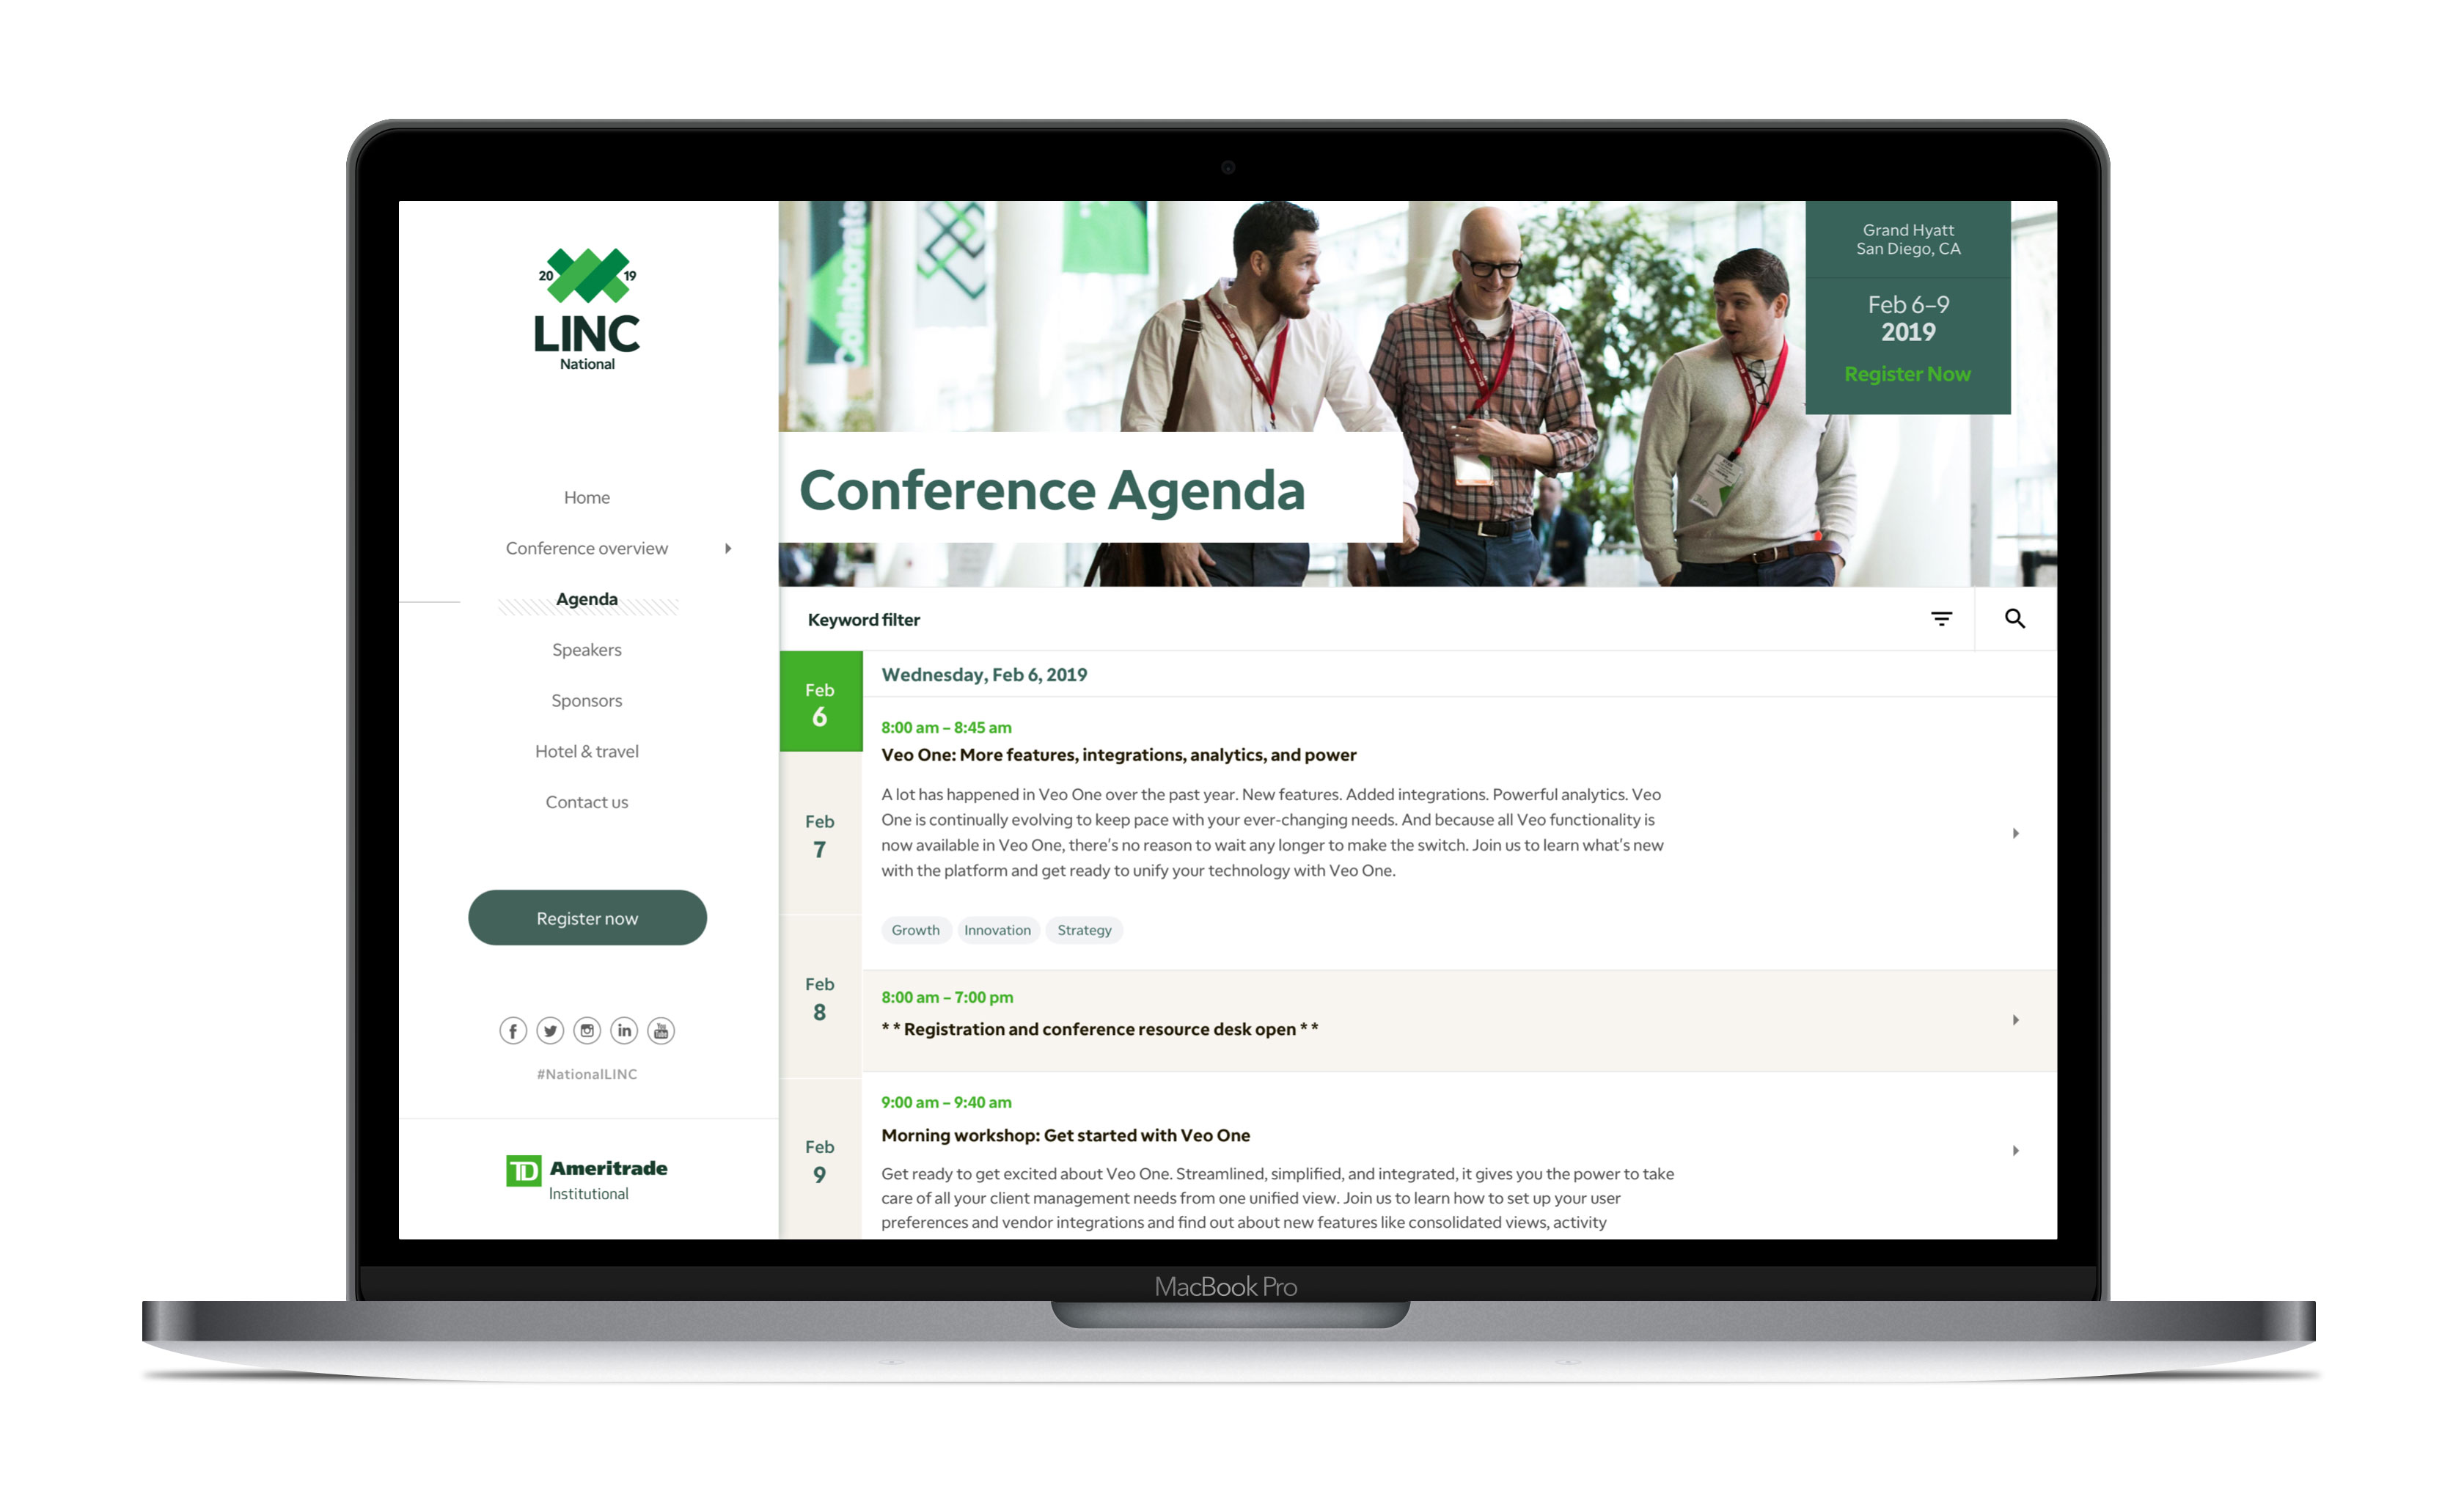 TD Ameritrade Institutional Conference Website Agenda Page on a Laptop